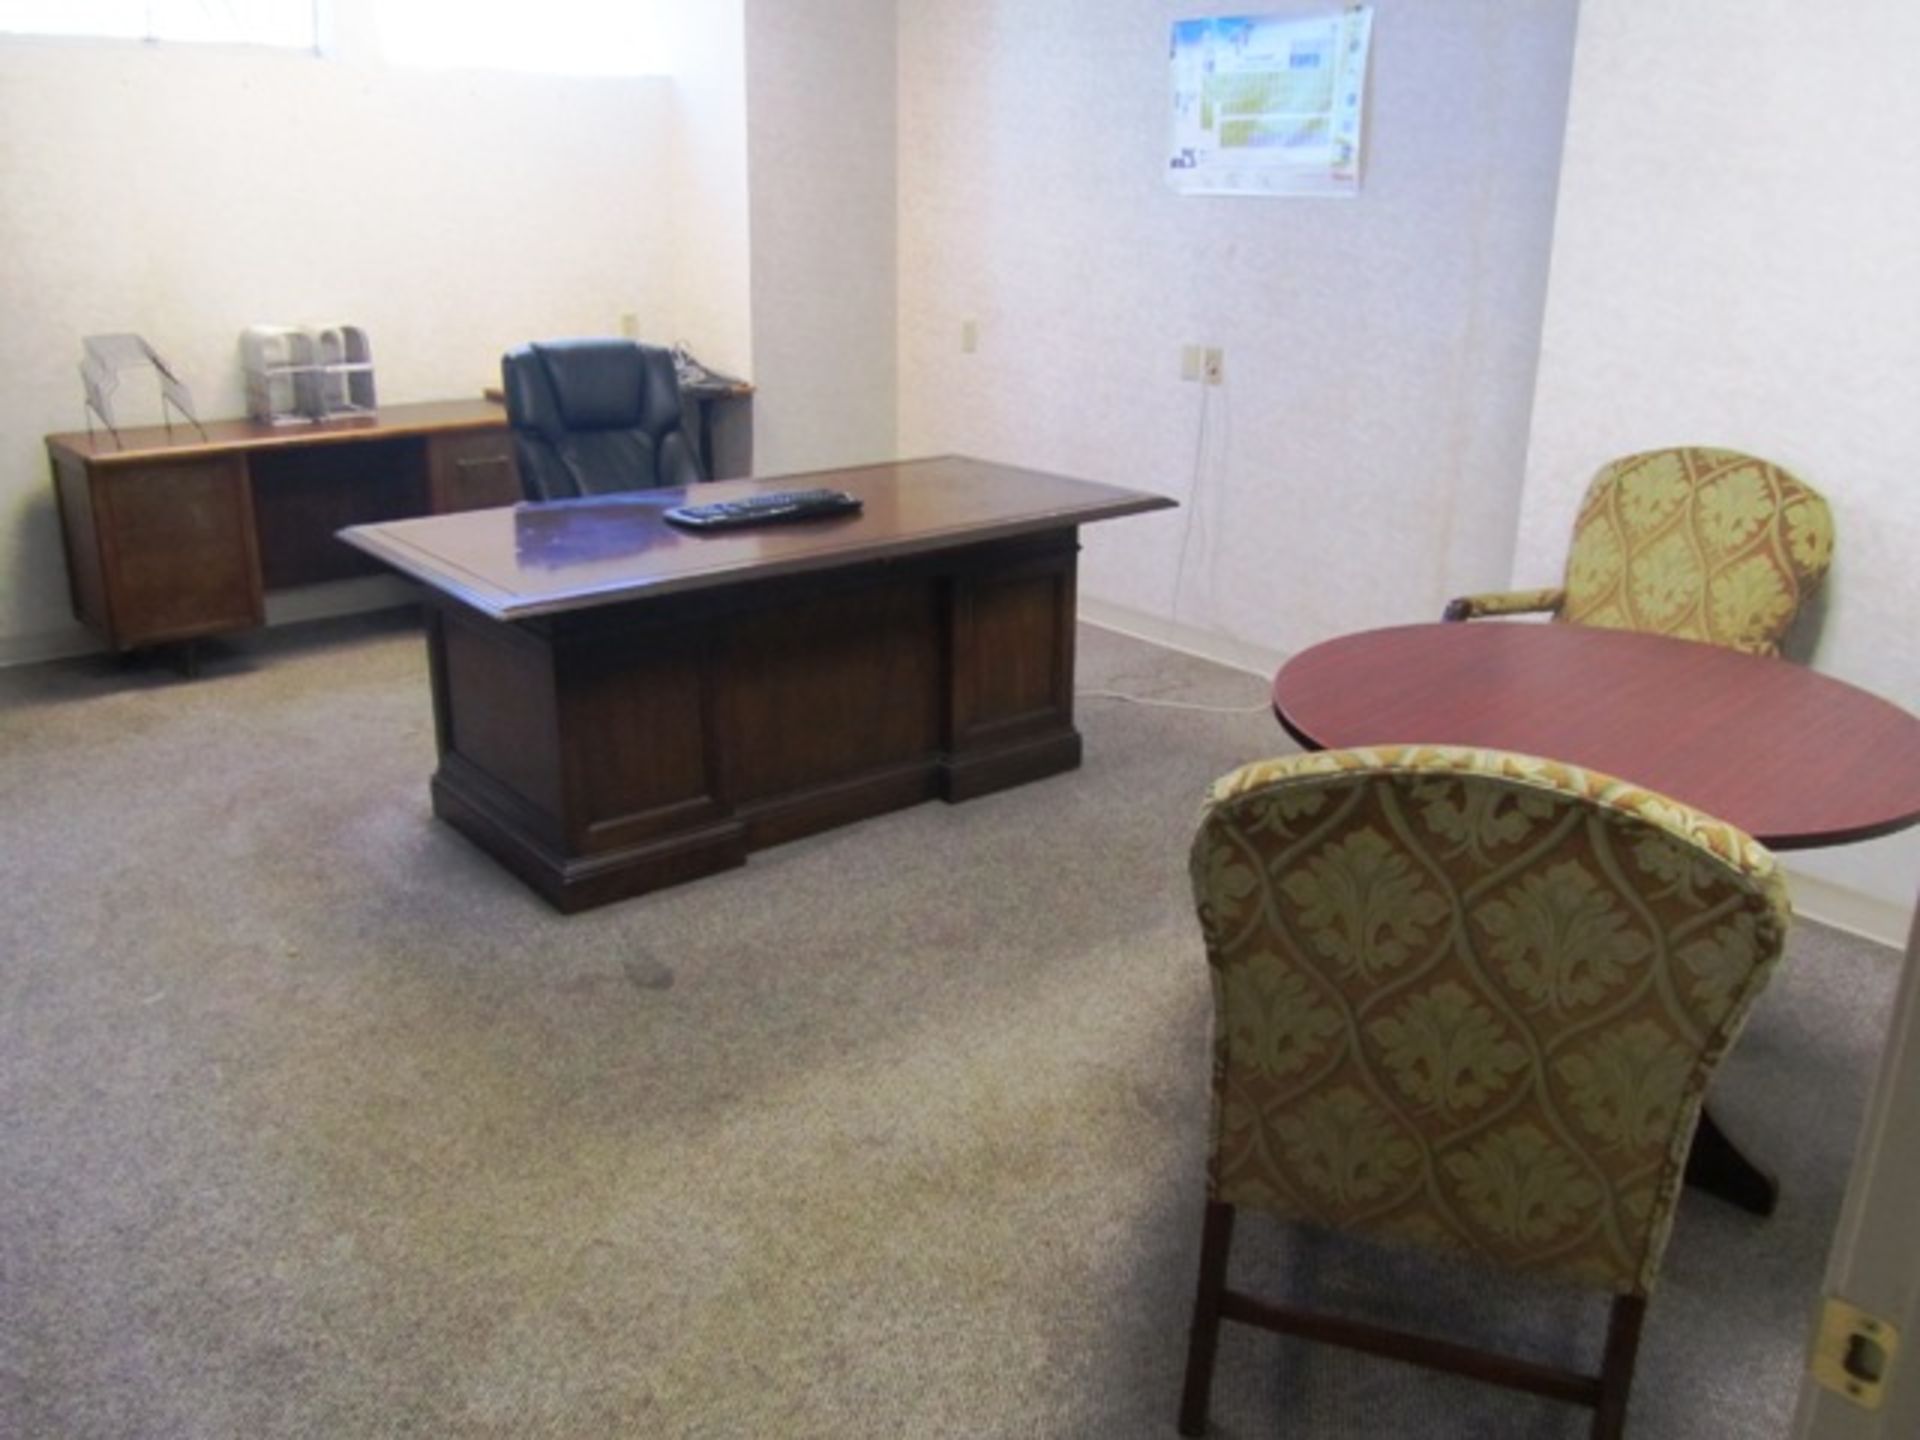 Contents of Office consisting of Desk, Chair, Round Table, (2) Chairs, Credenza, Bookshelf